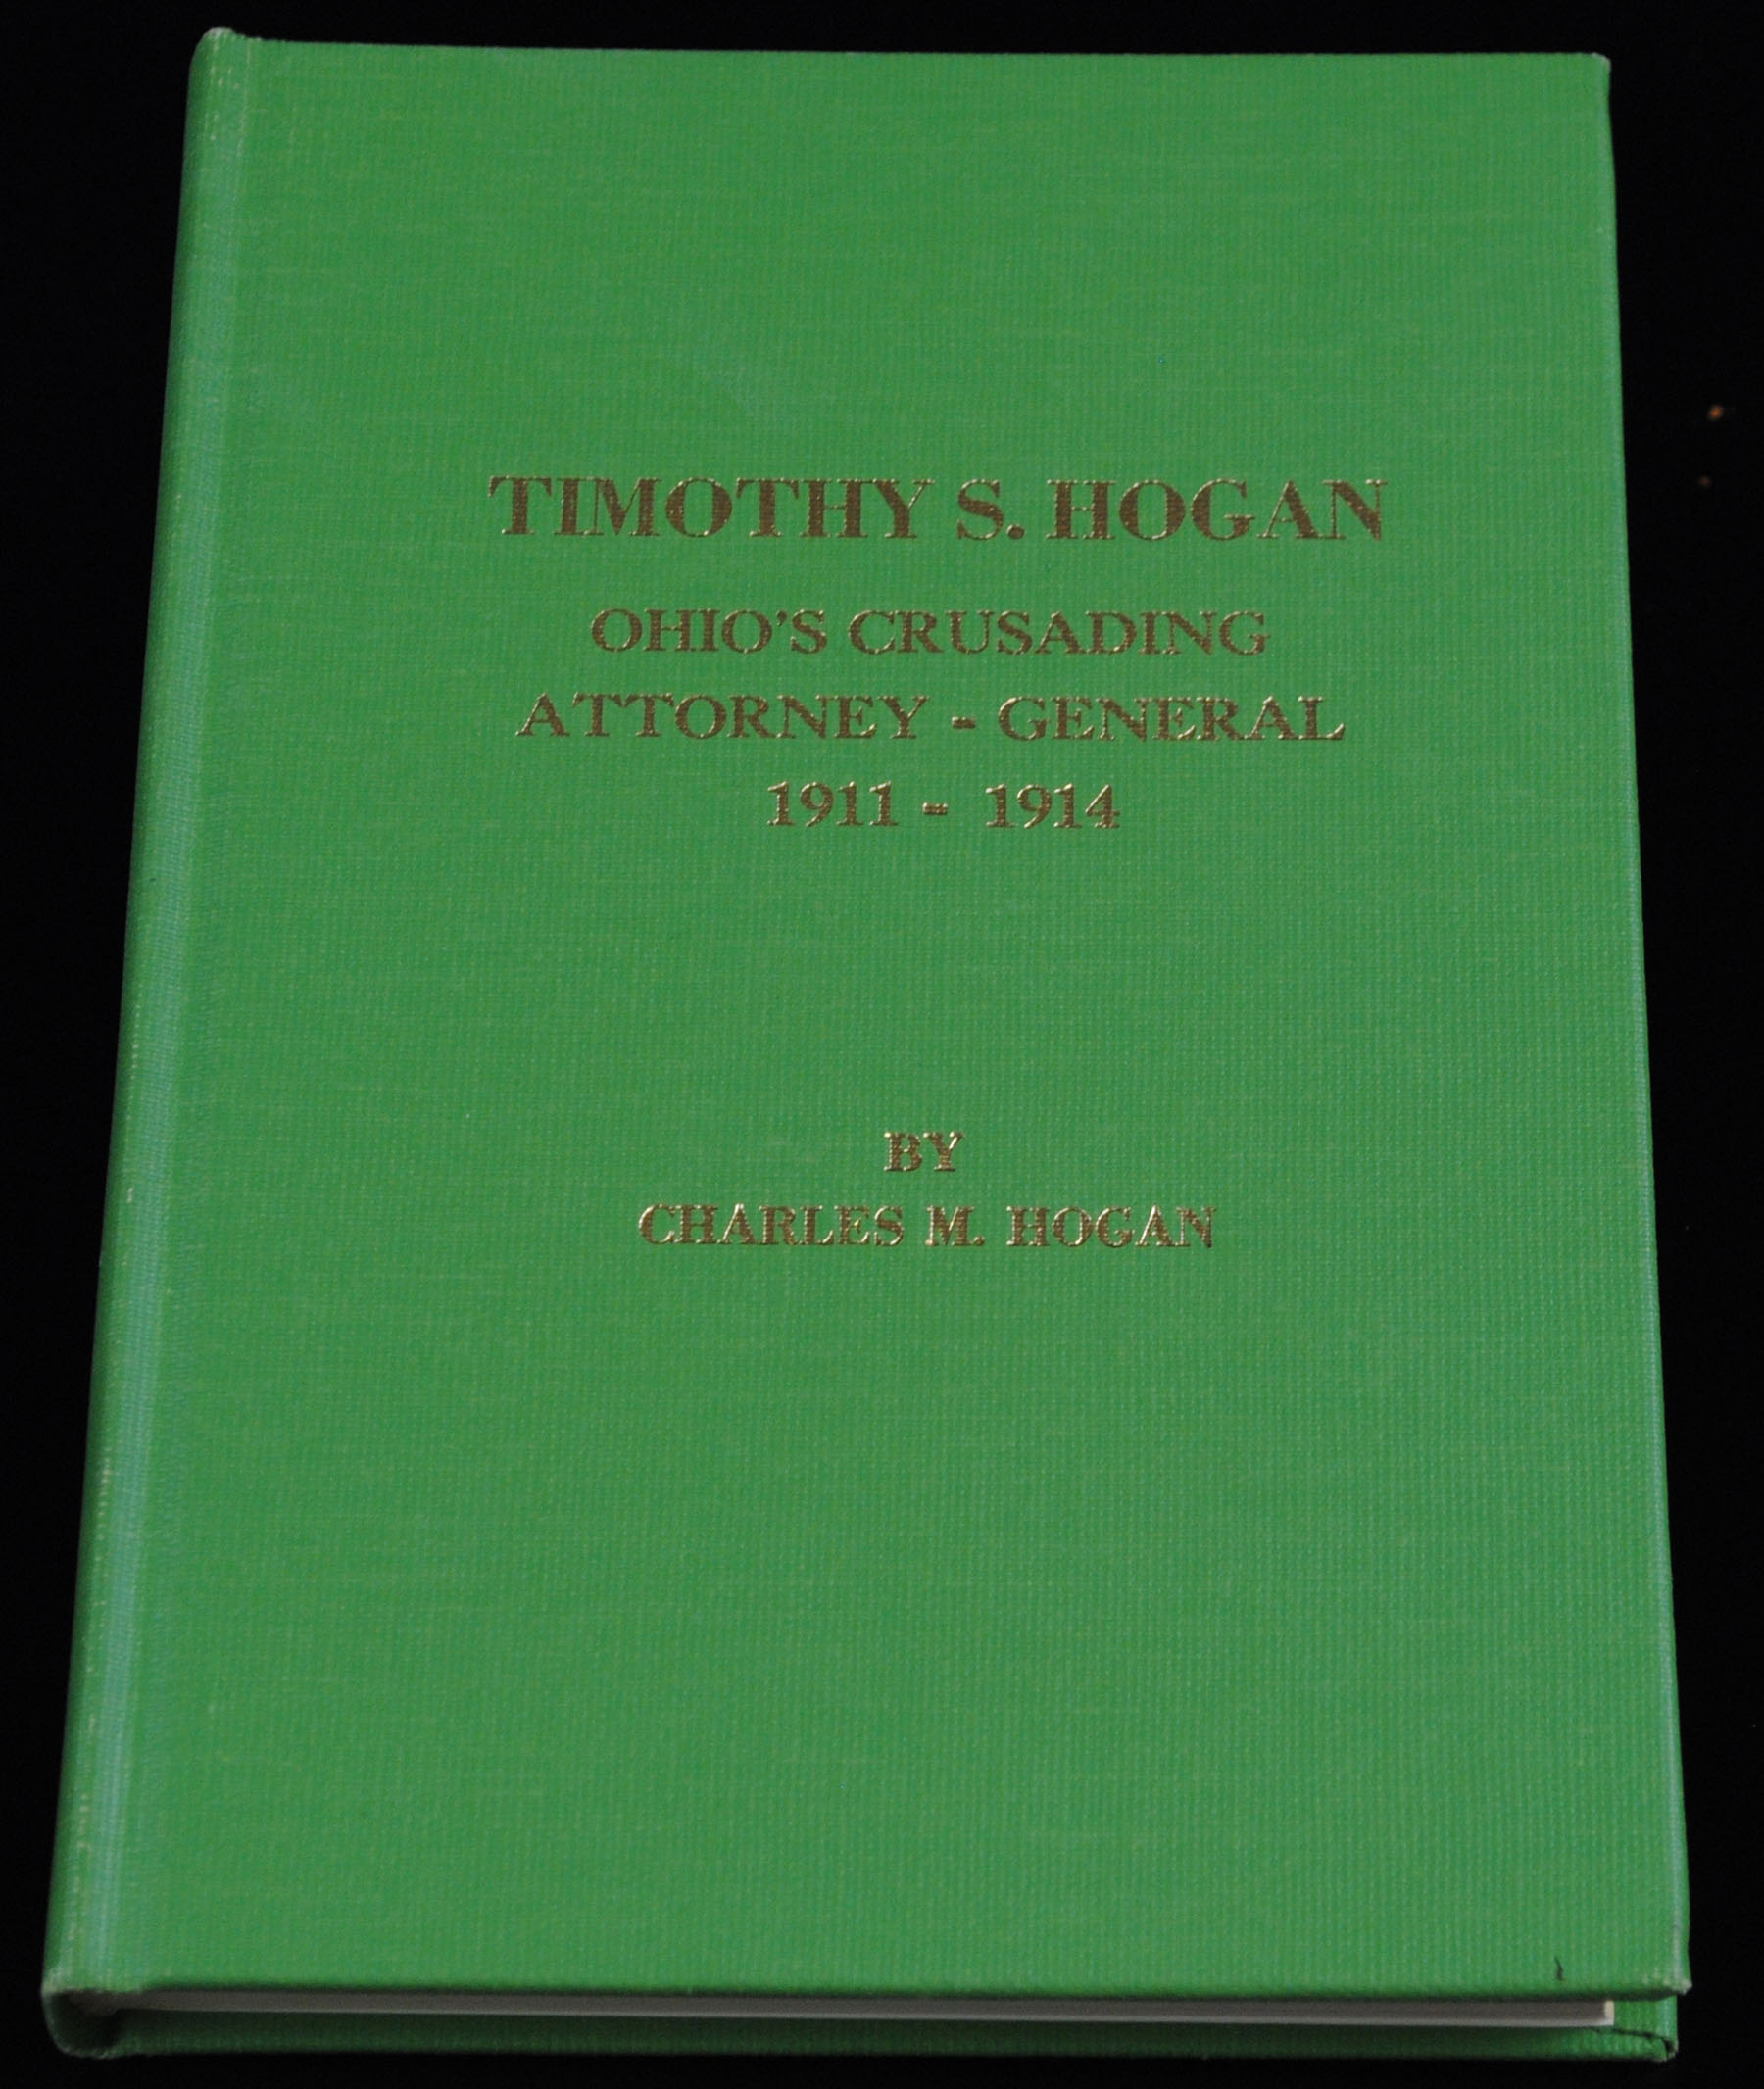 Biography of Attorney General Timothy S. Hogan